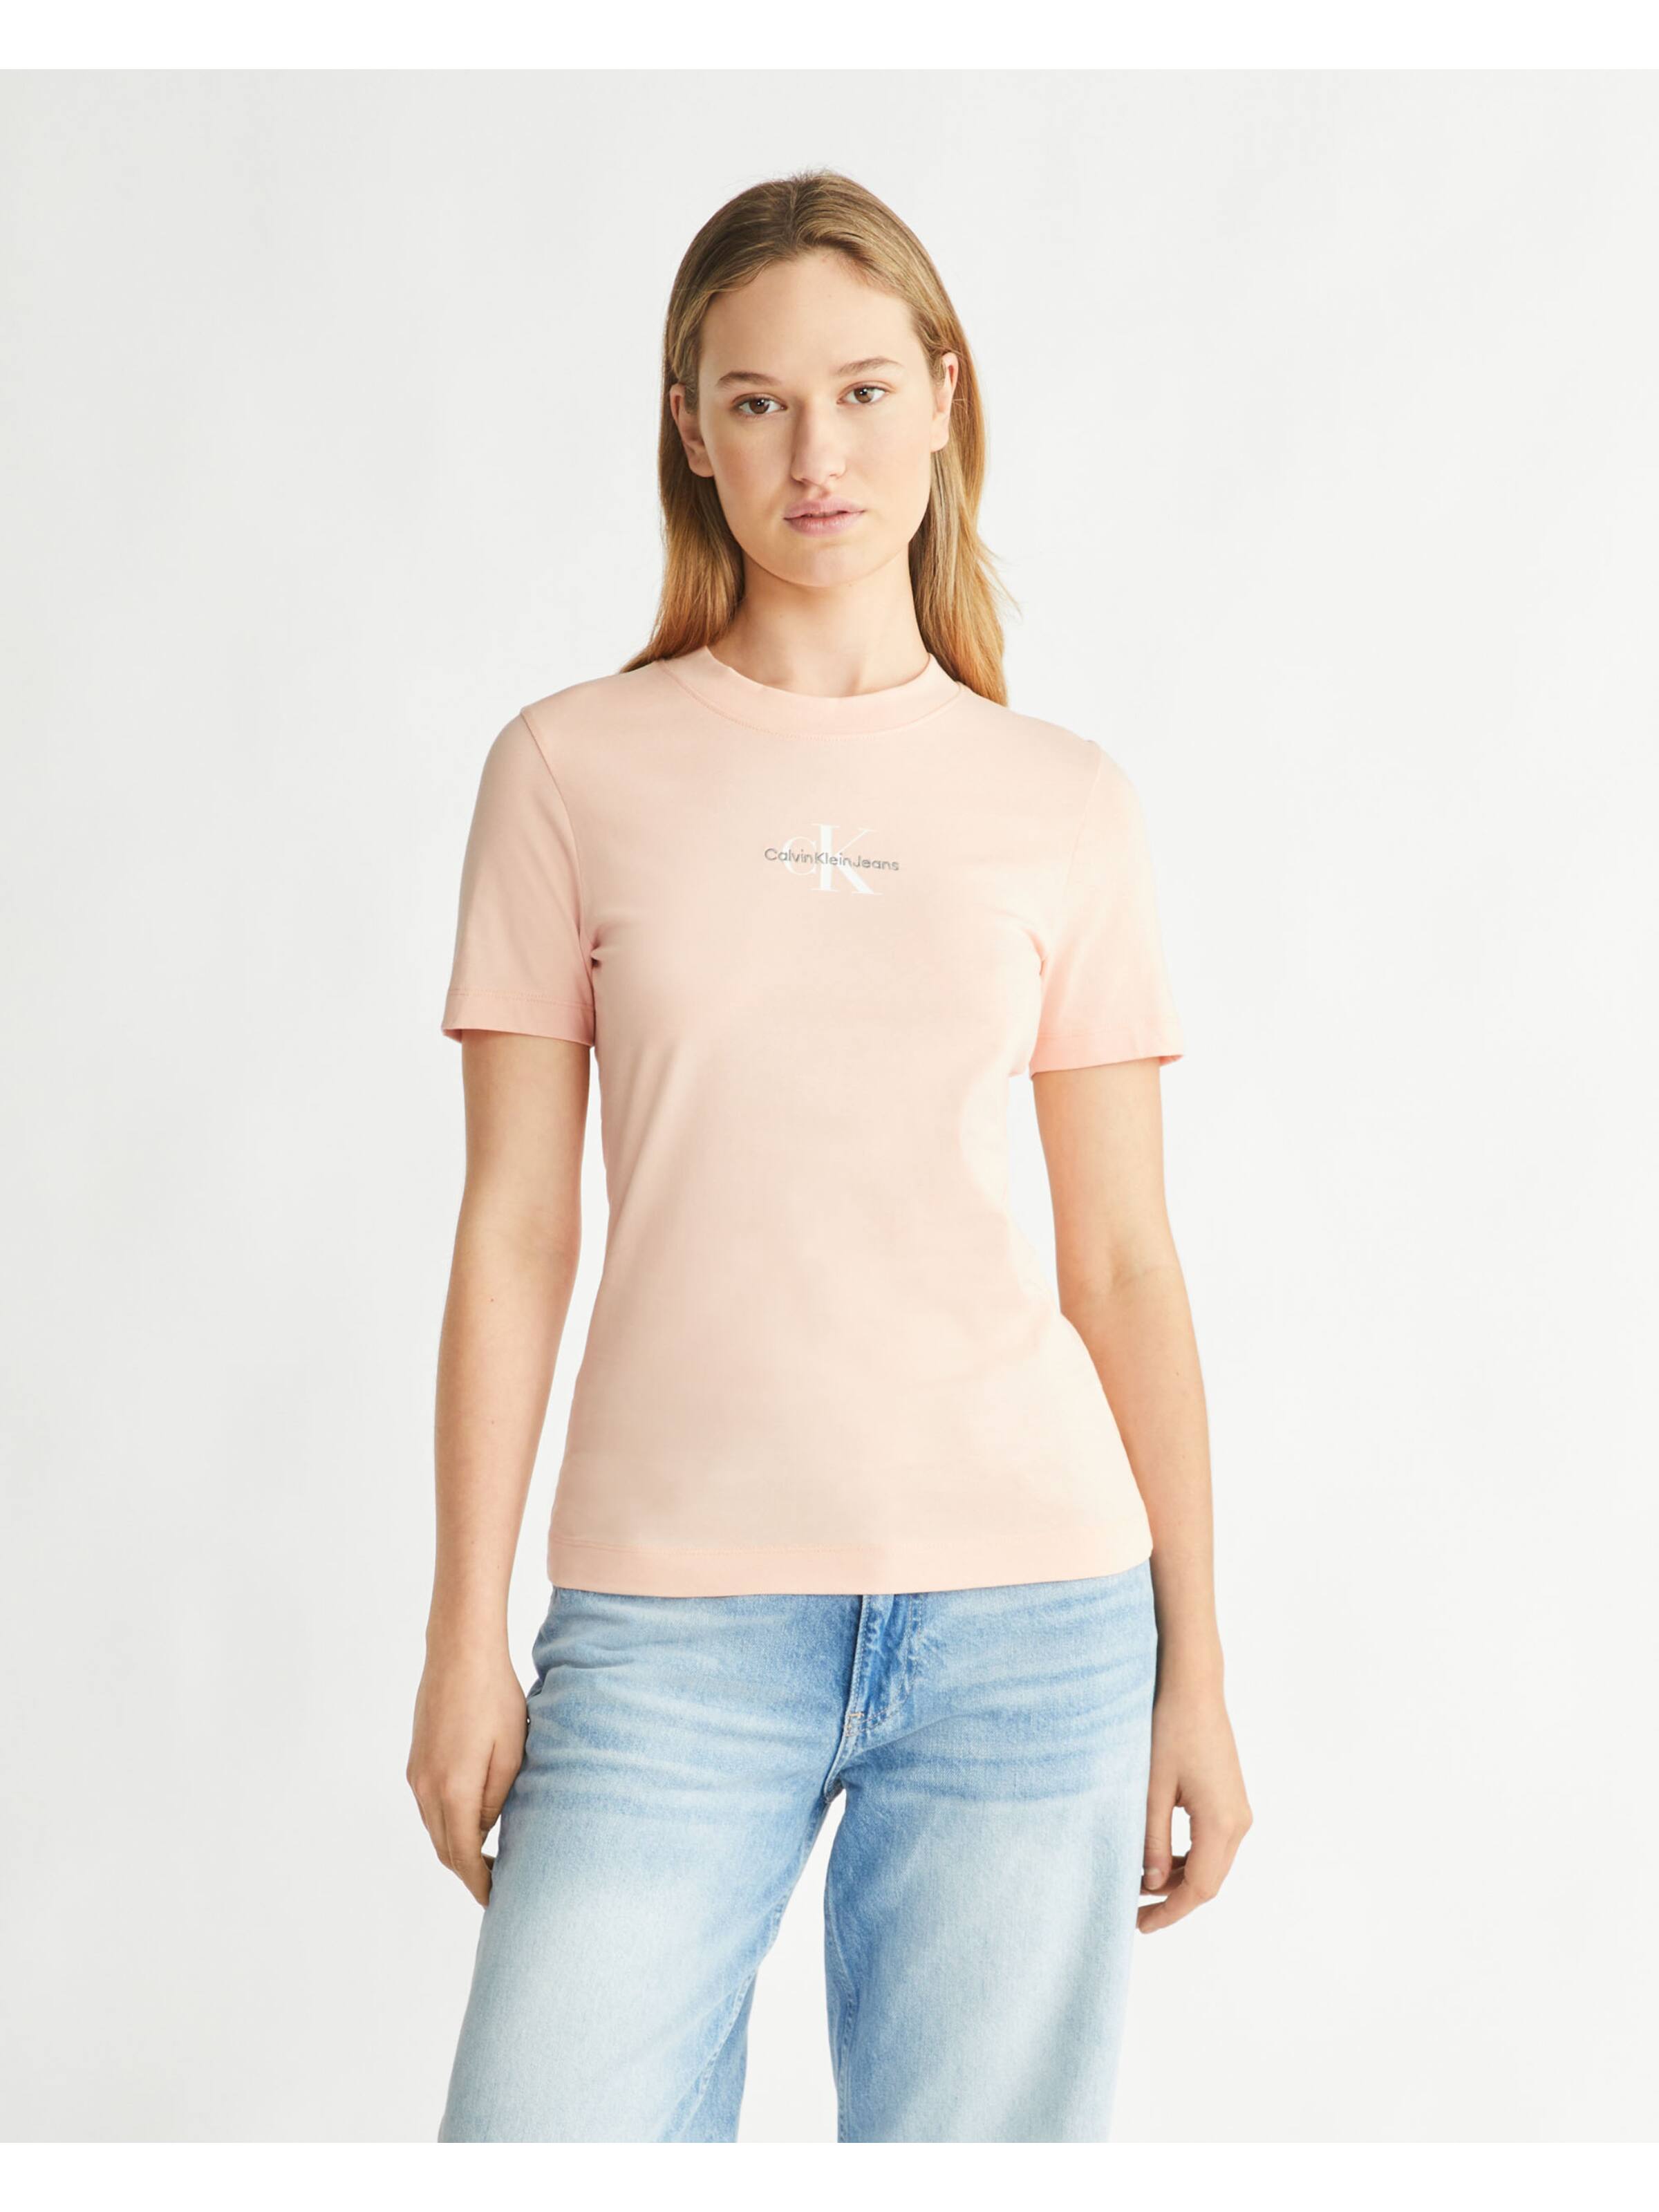 Monologo Slim Fit Tee In Jeans Online Just - Faint Blossom